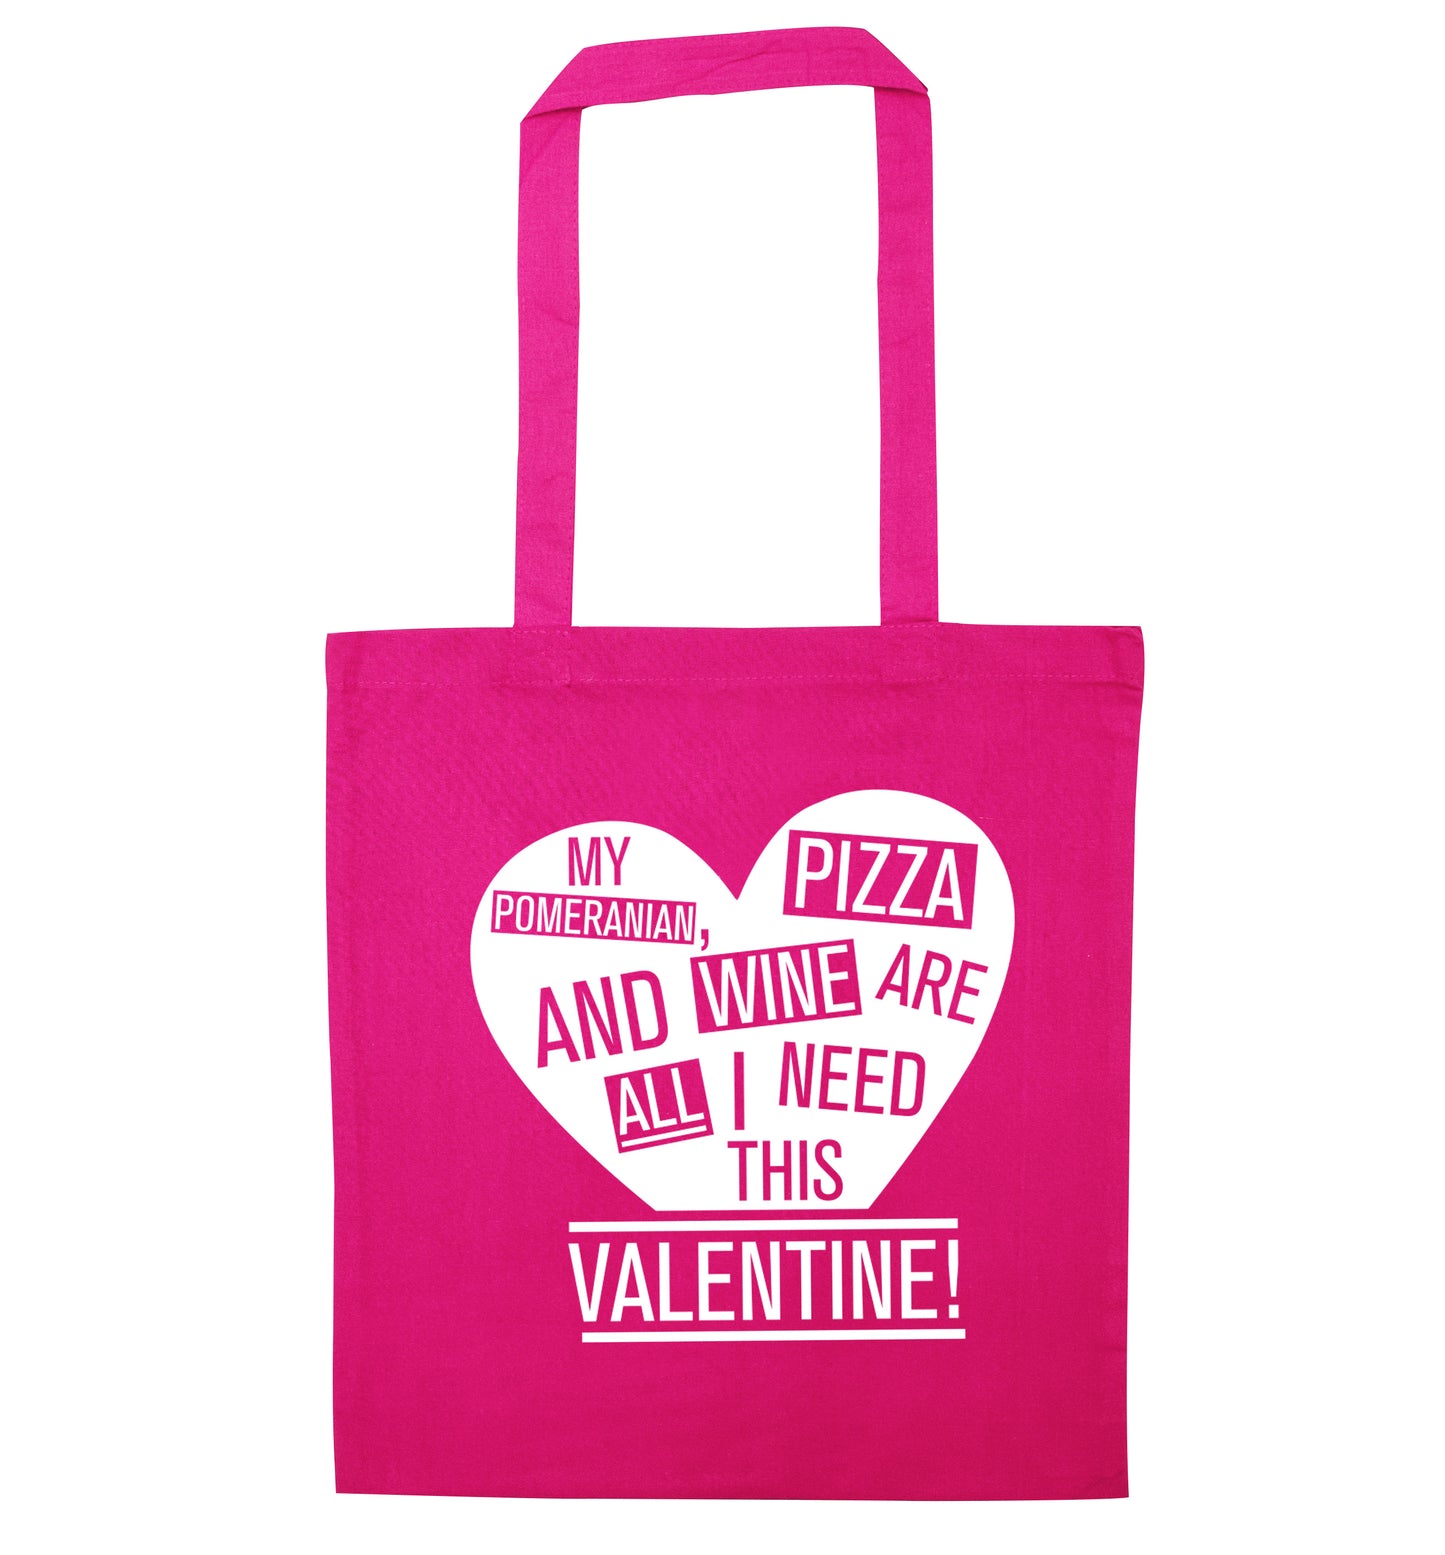 My pomeranian, chocolate and wine are all I need this valentine! pink tote bag